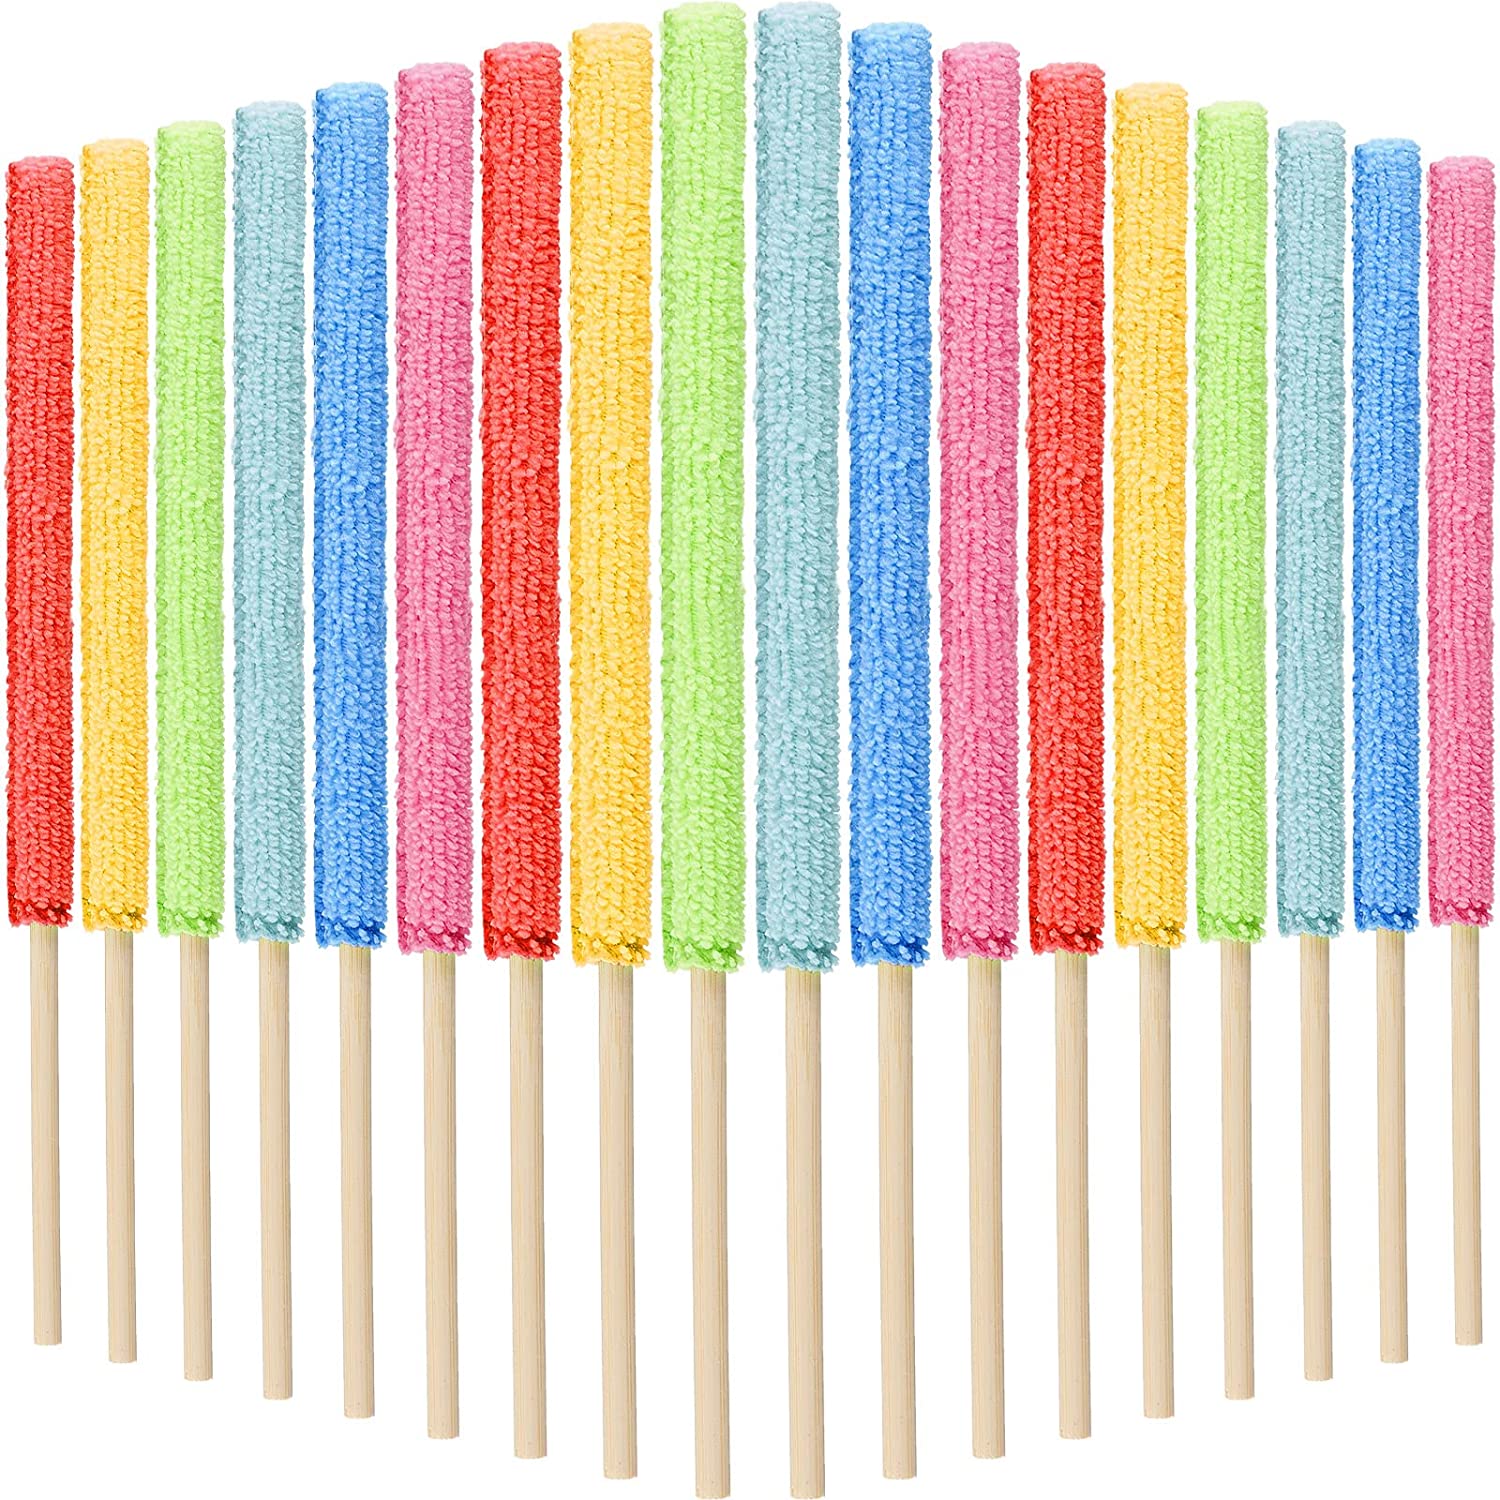 28Pcs Microfiber Detail Duster Sticks Crevice Cleaning Tool